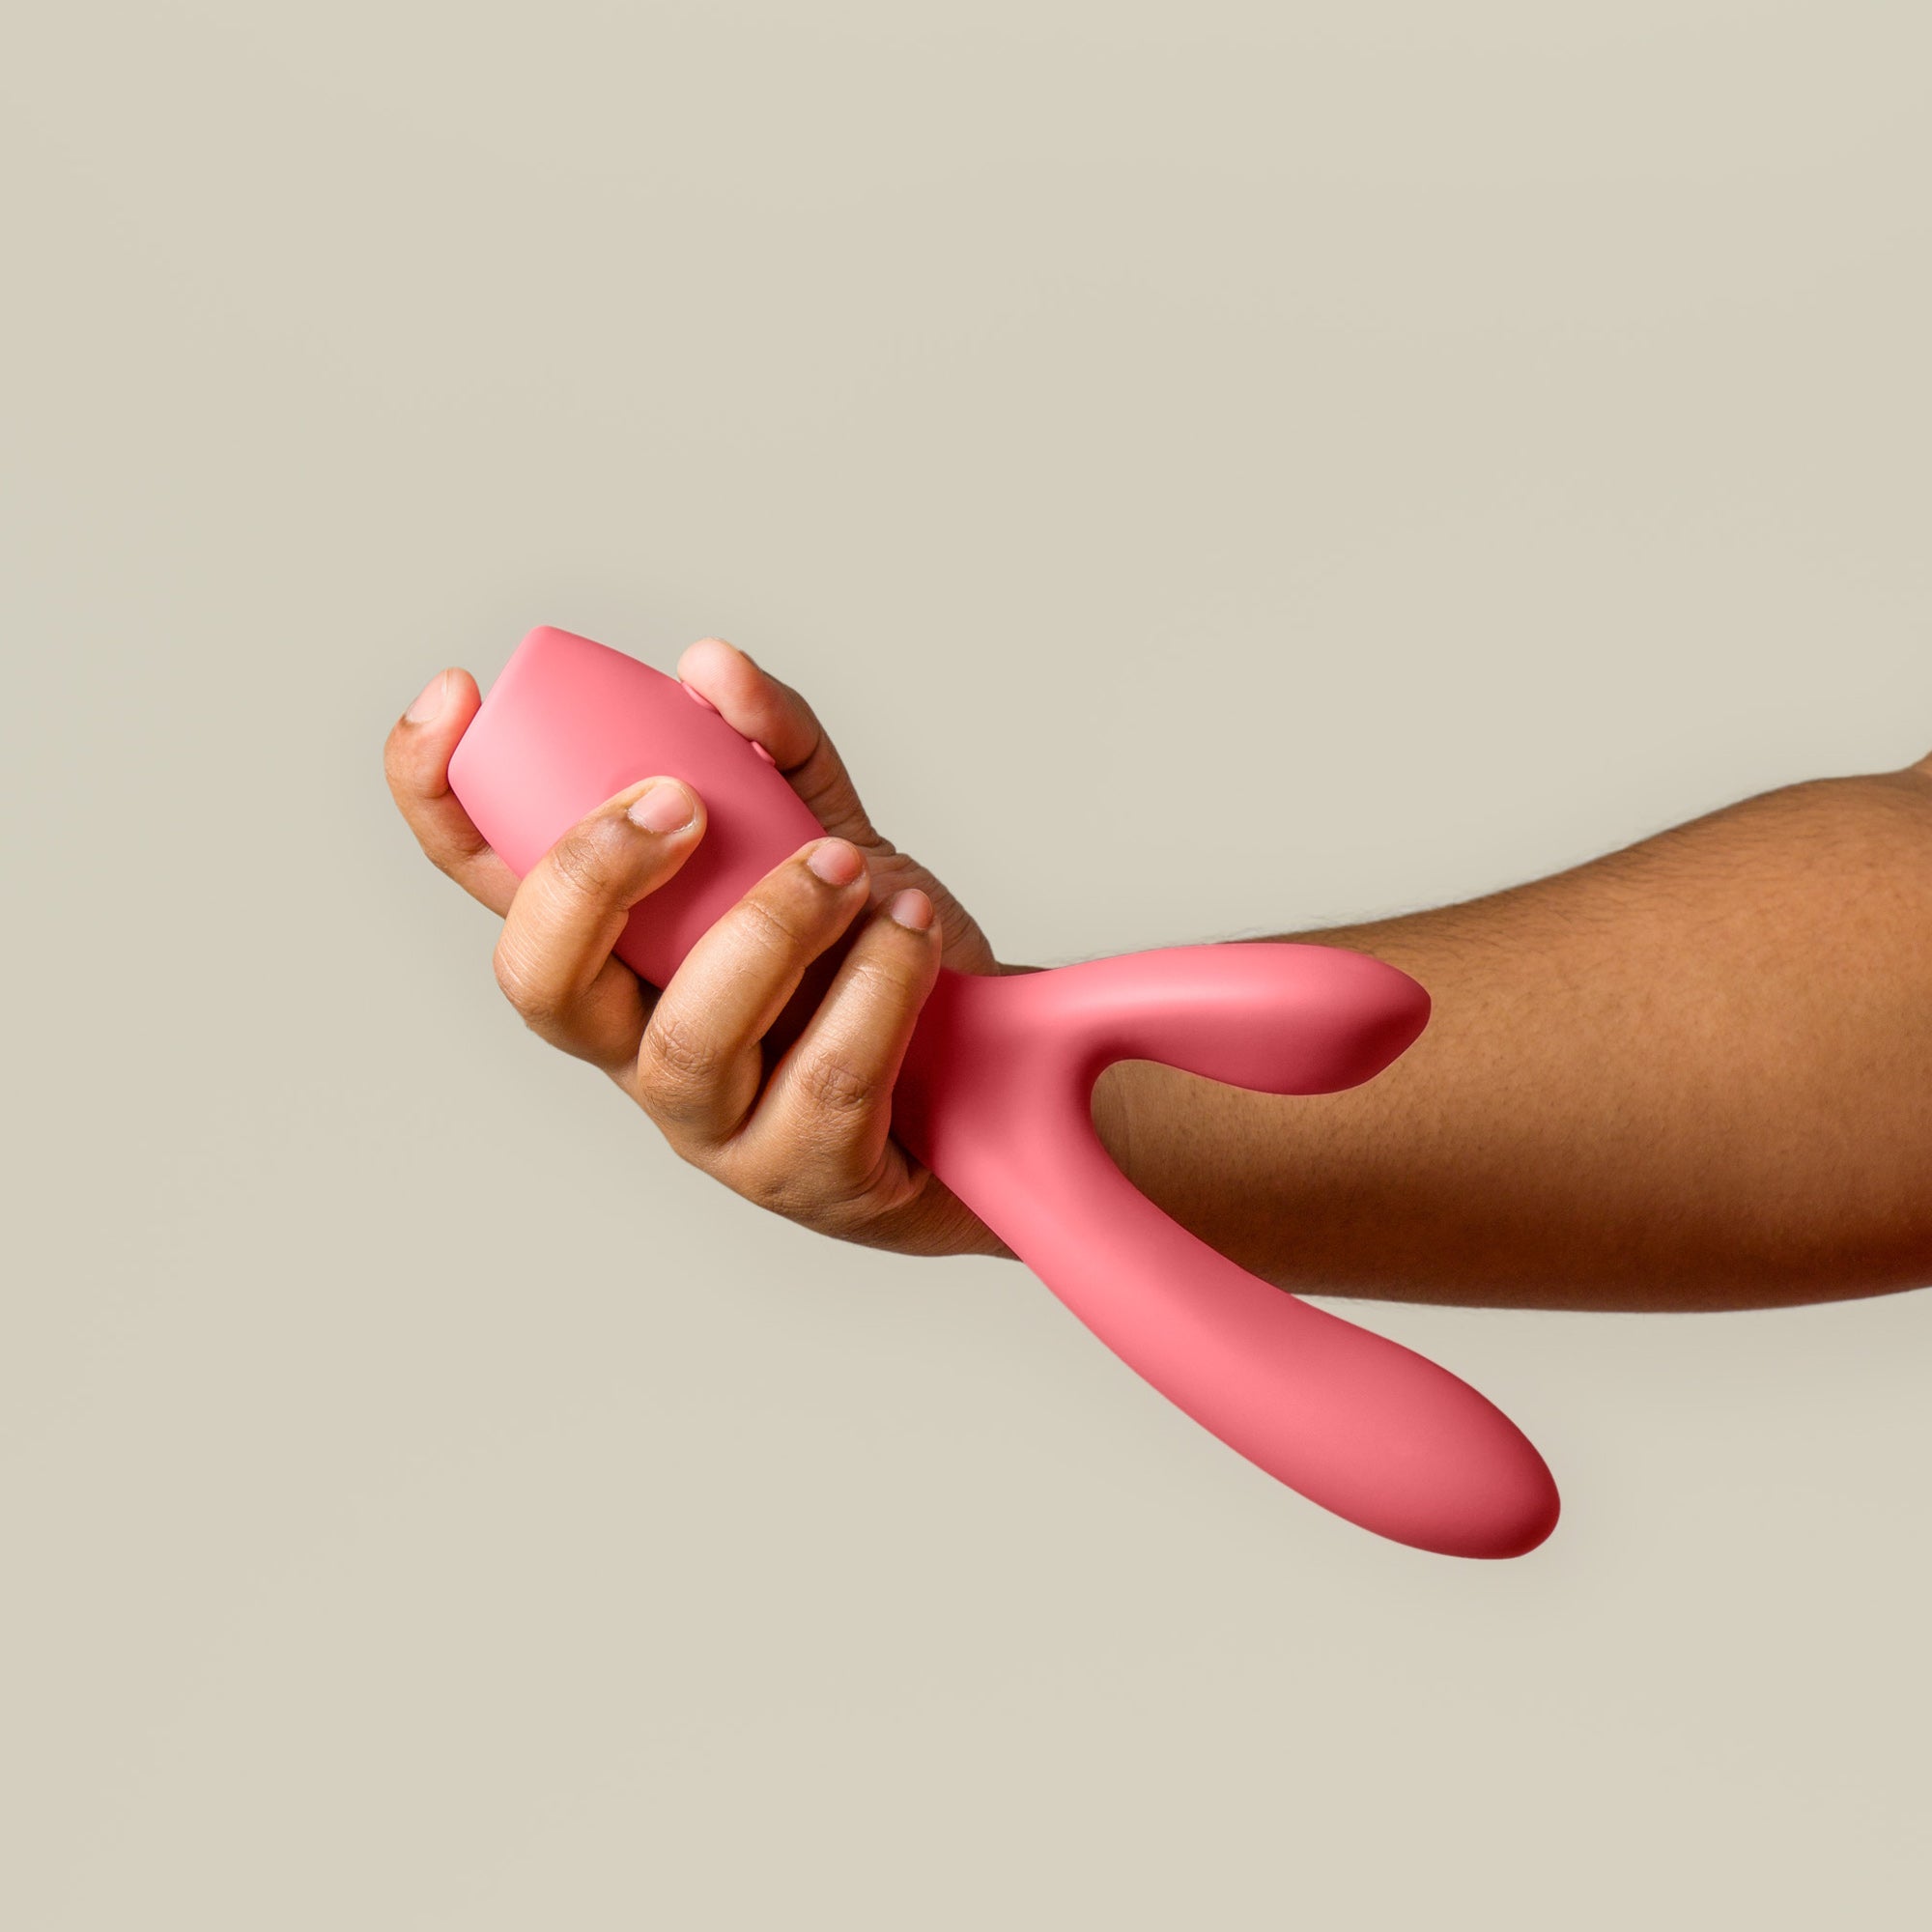 The Dual The Makers Artist Vibrator Period – -Stimulating Smile